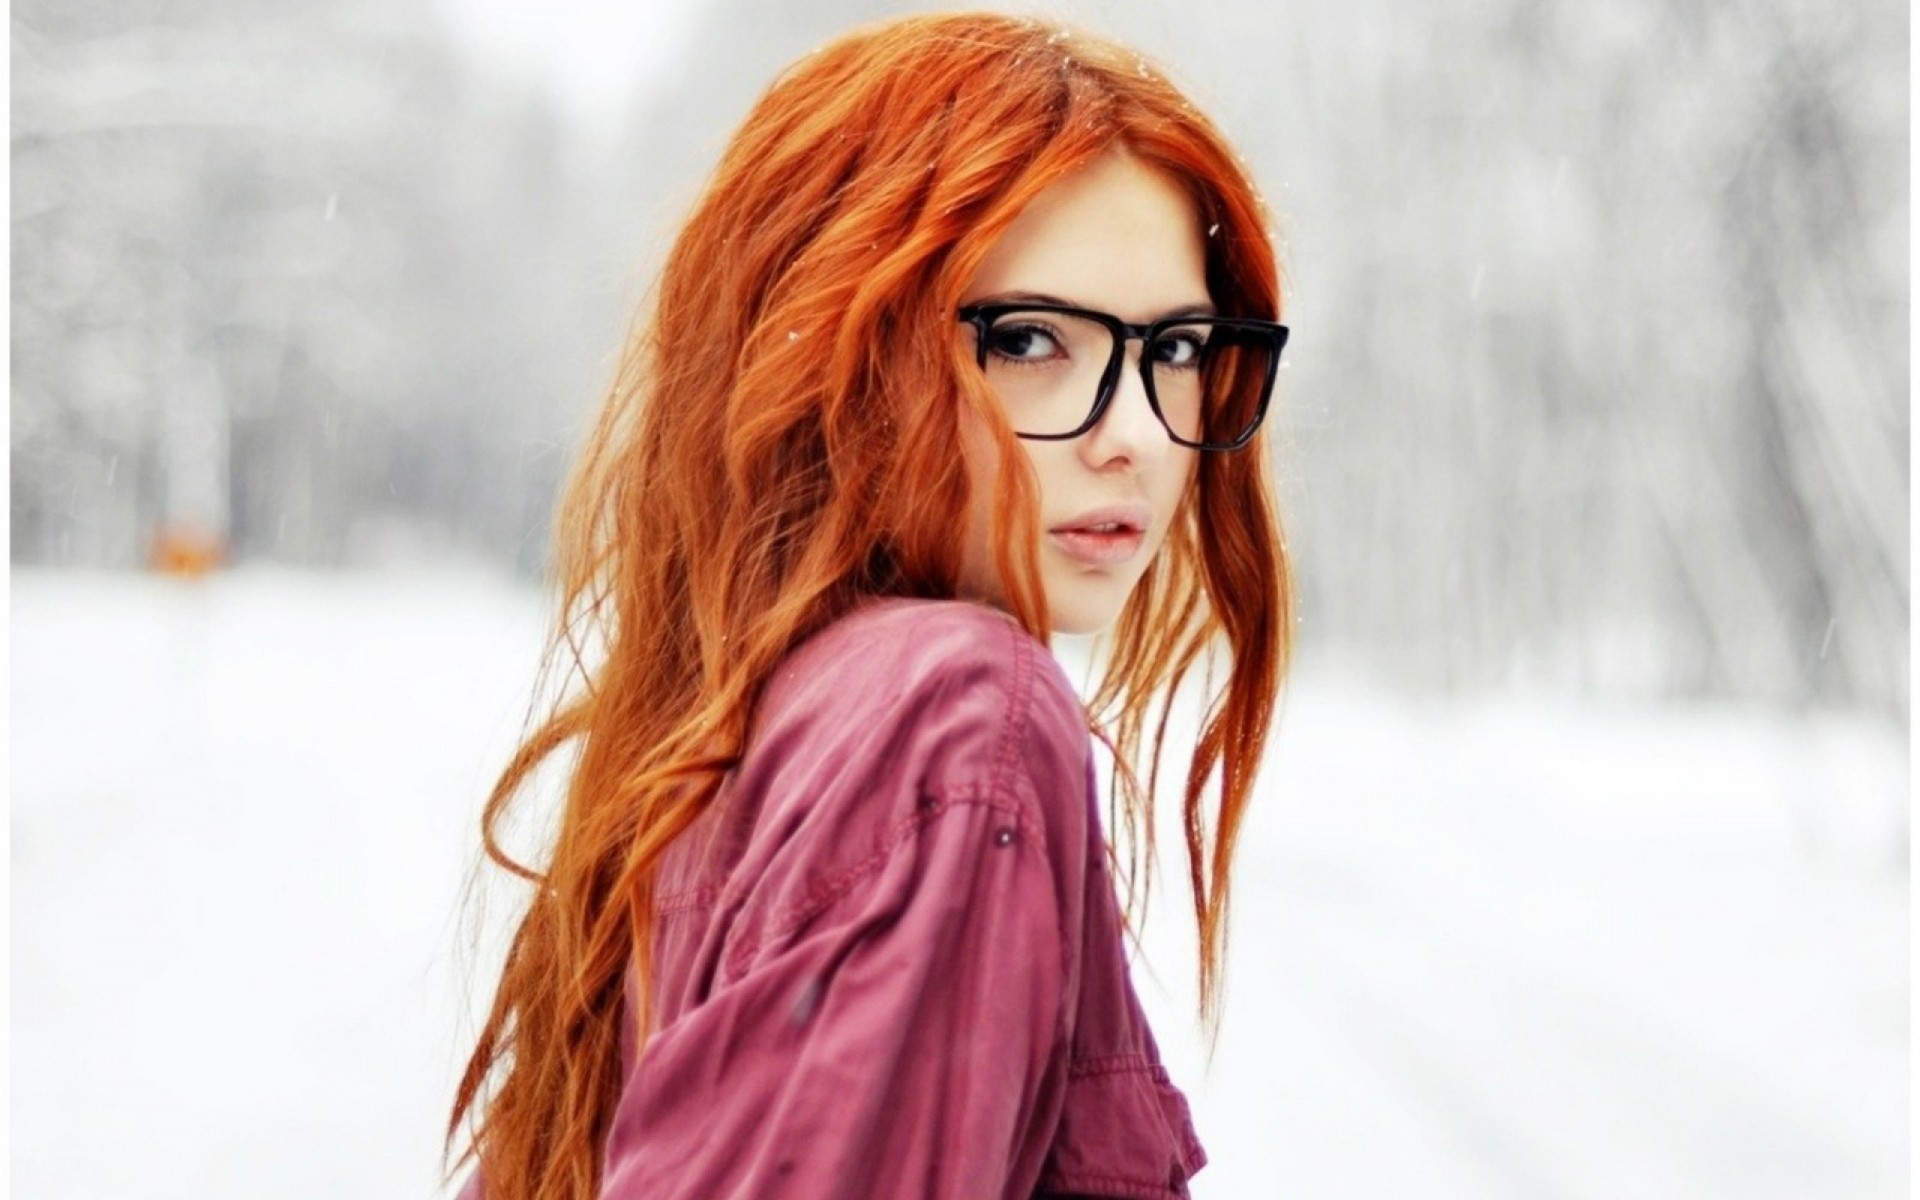 women, Winter, Snow, Redheads, Glasses, Faces, Girls, With, Glasses, Ebba, Zingmark Wallpaper